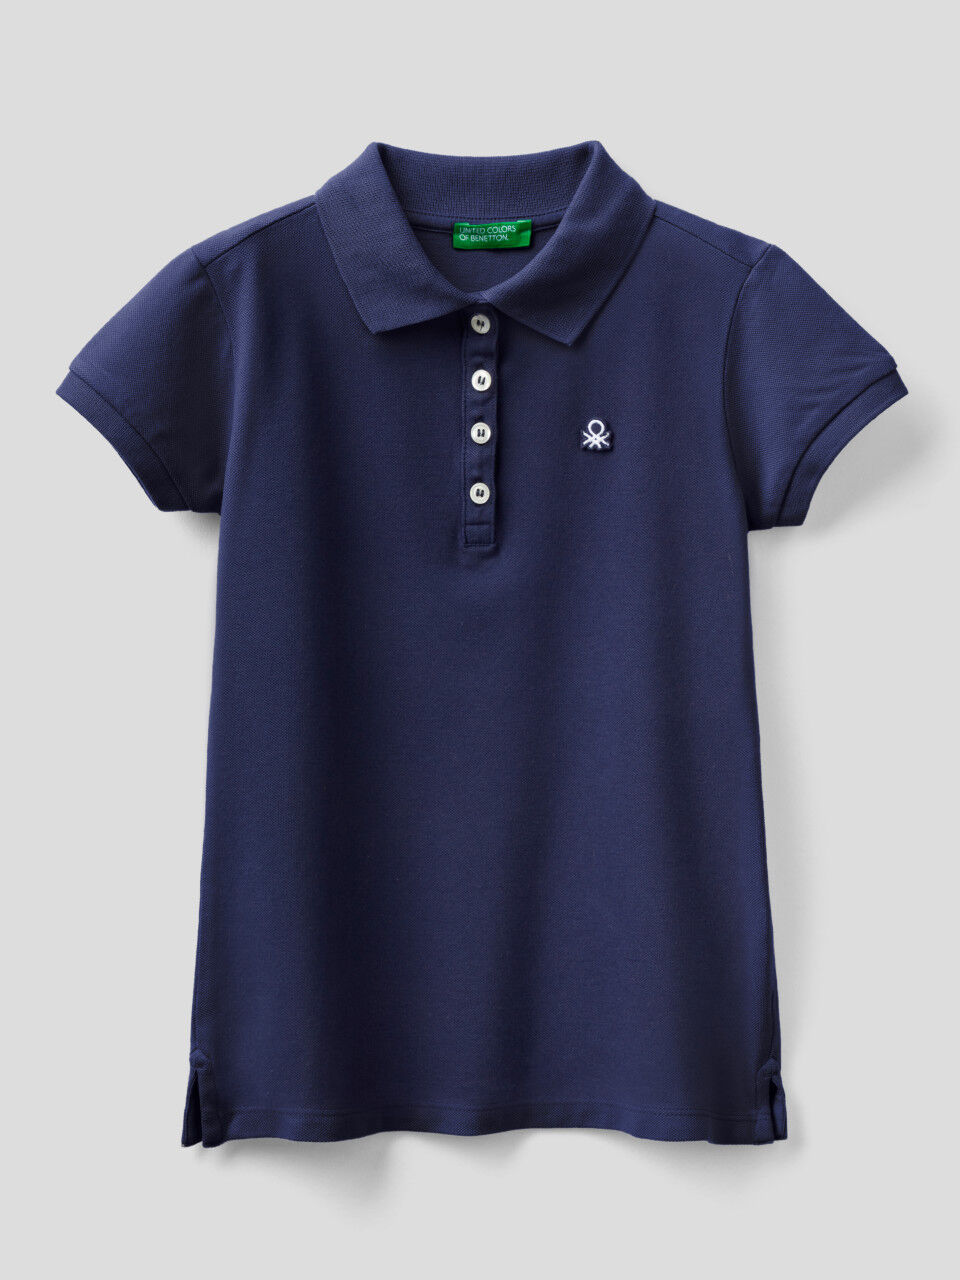 United Colors of Benetton Girl's Polo Shirt